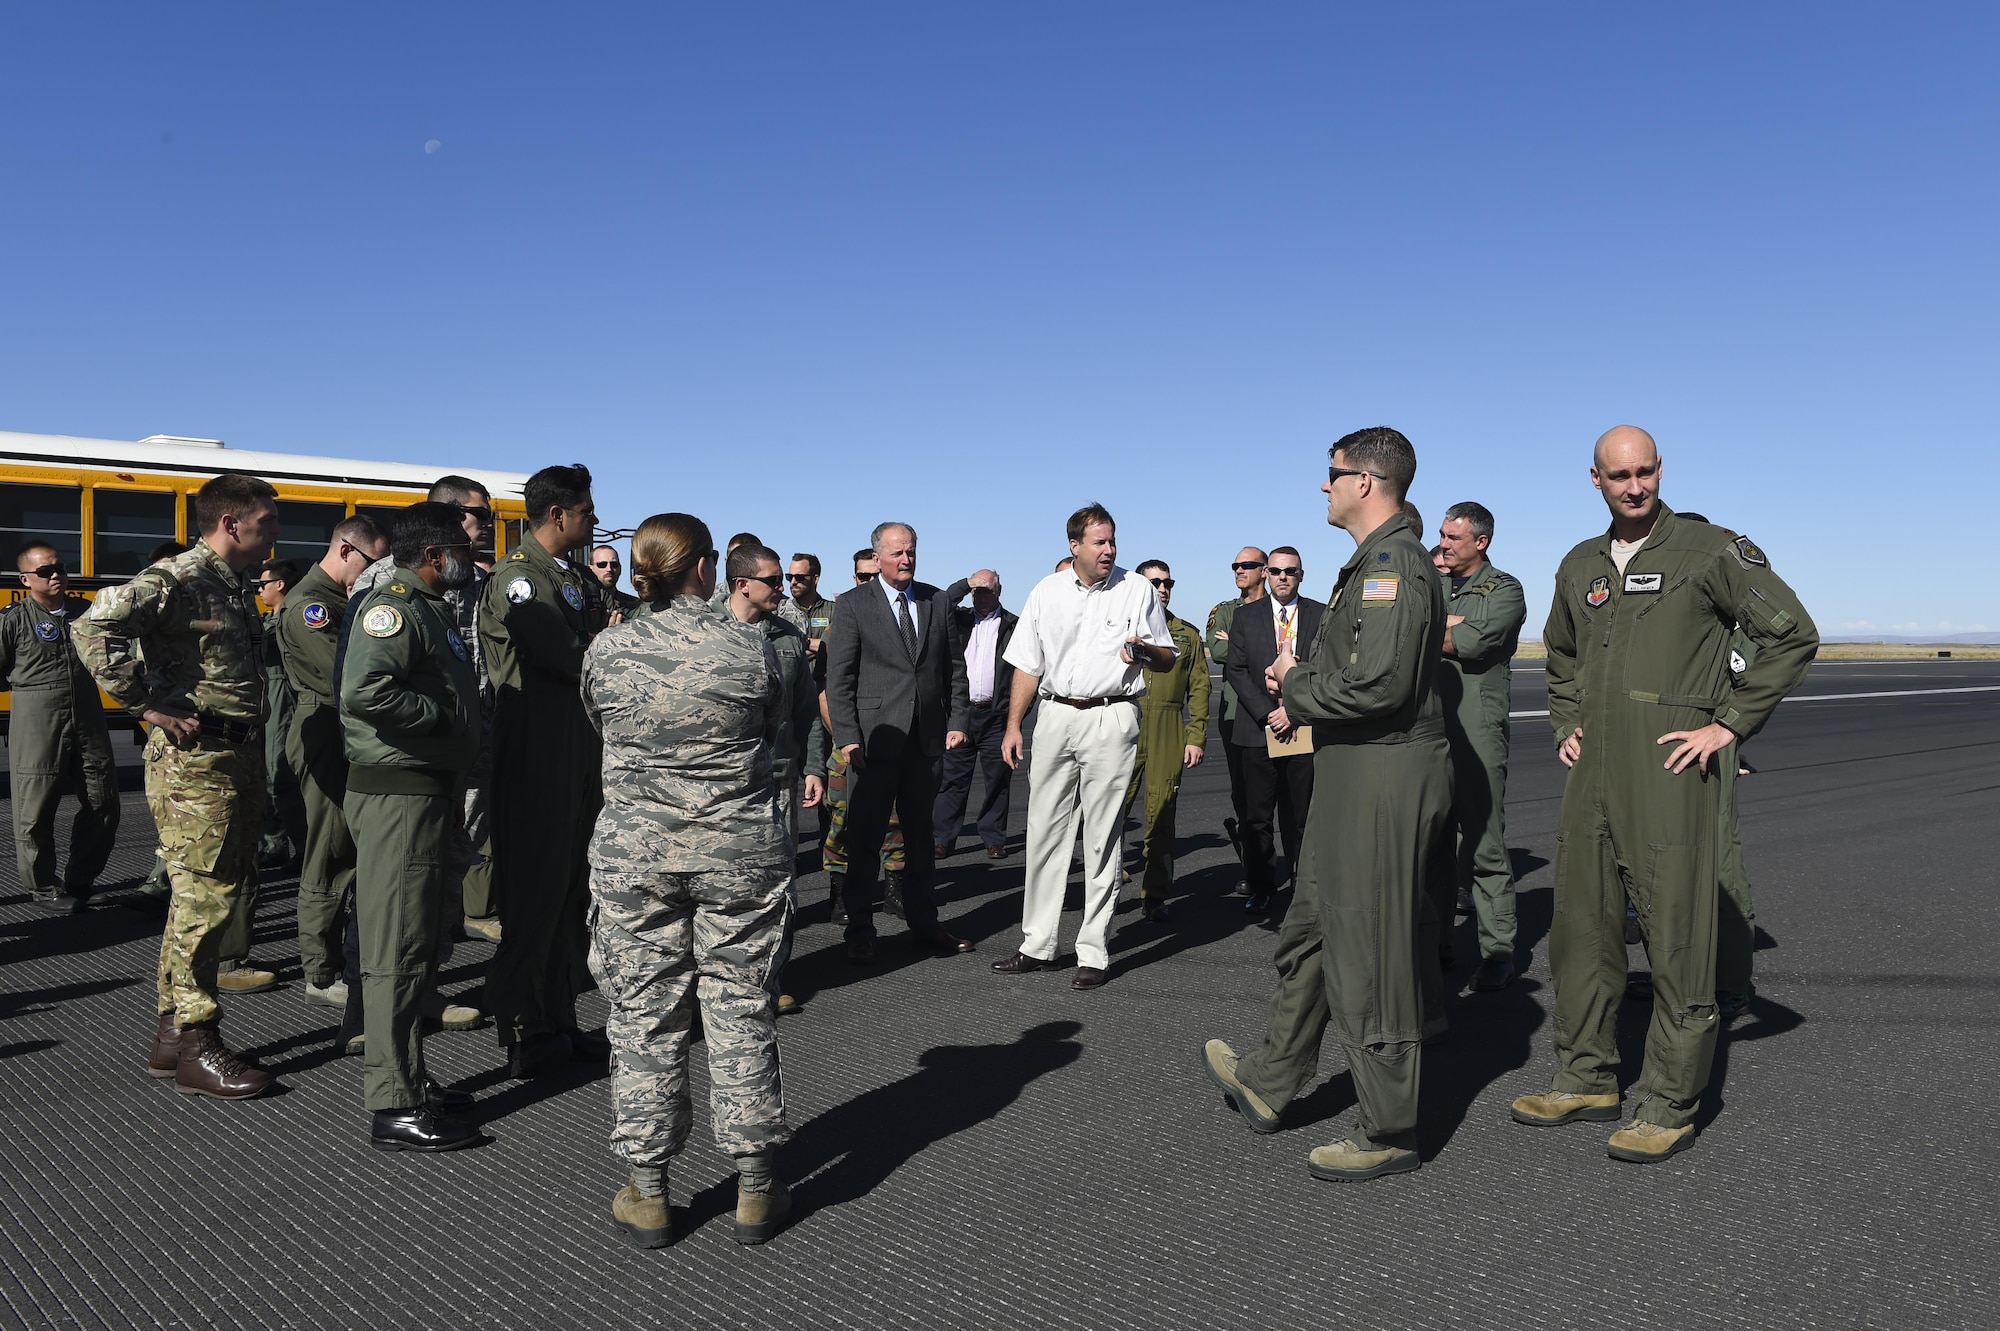 Members of the 62nd Airlift Wing, Air Mobility Command, and international mission partners tour the Grant County International Airport Sept. 21, 2016, as part of Air Mobility Command’s Mobility Guardian site visit. The more than eight international air crews will be participating in next year’s joint force exercise. (Air Force photo/ Staff Sgt. Naomi Shipley)